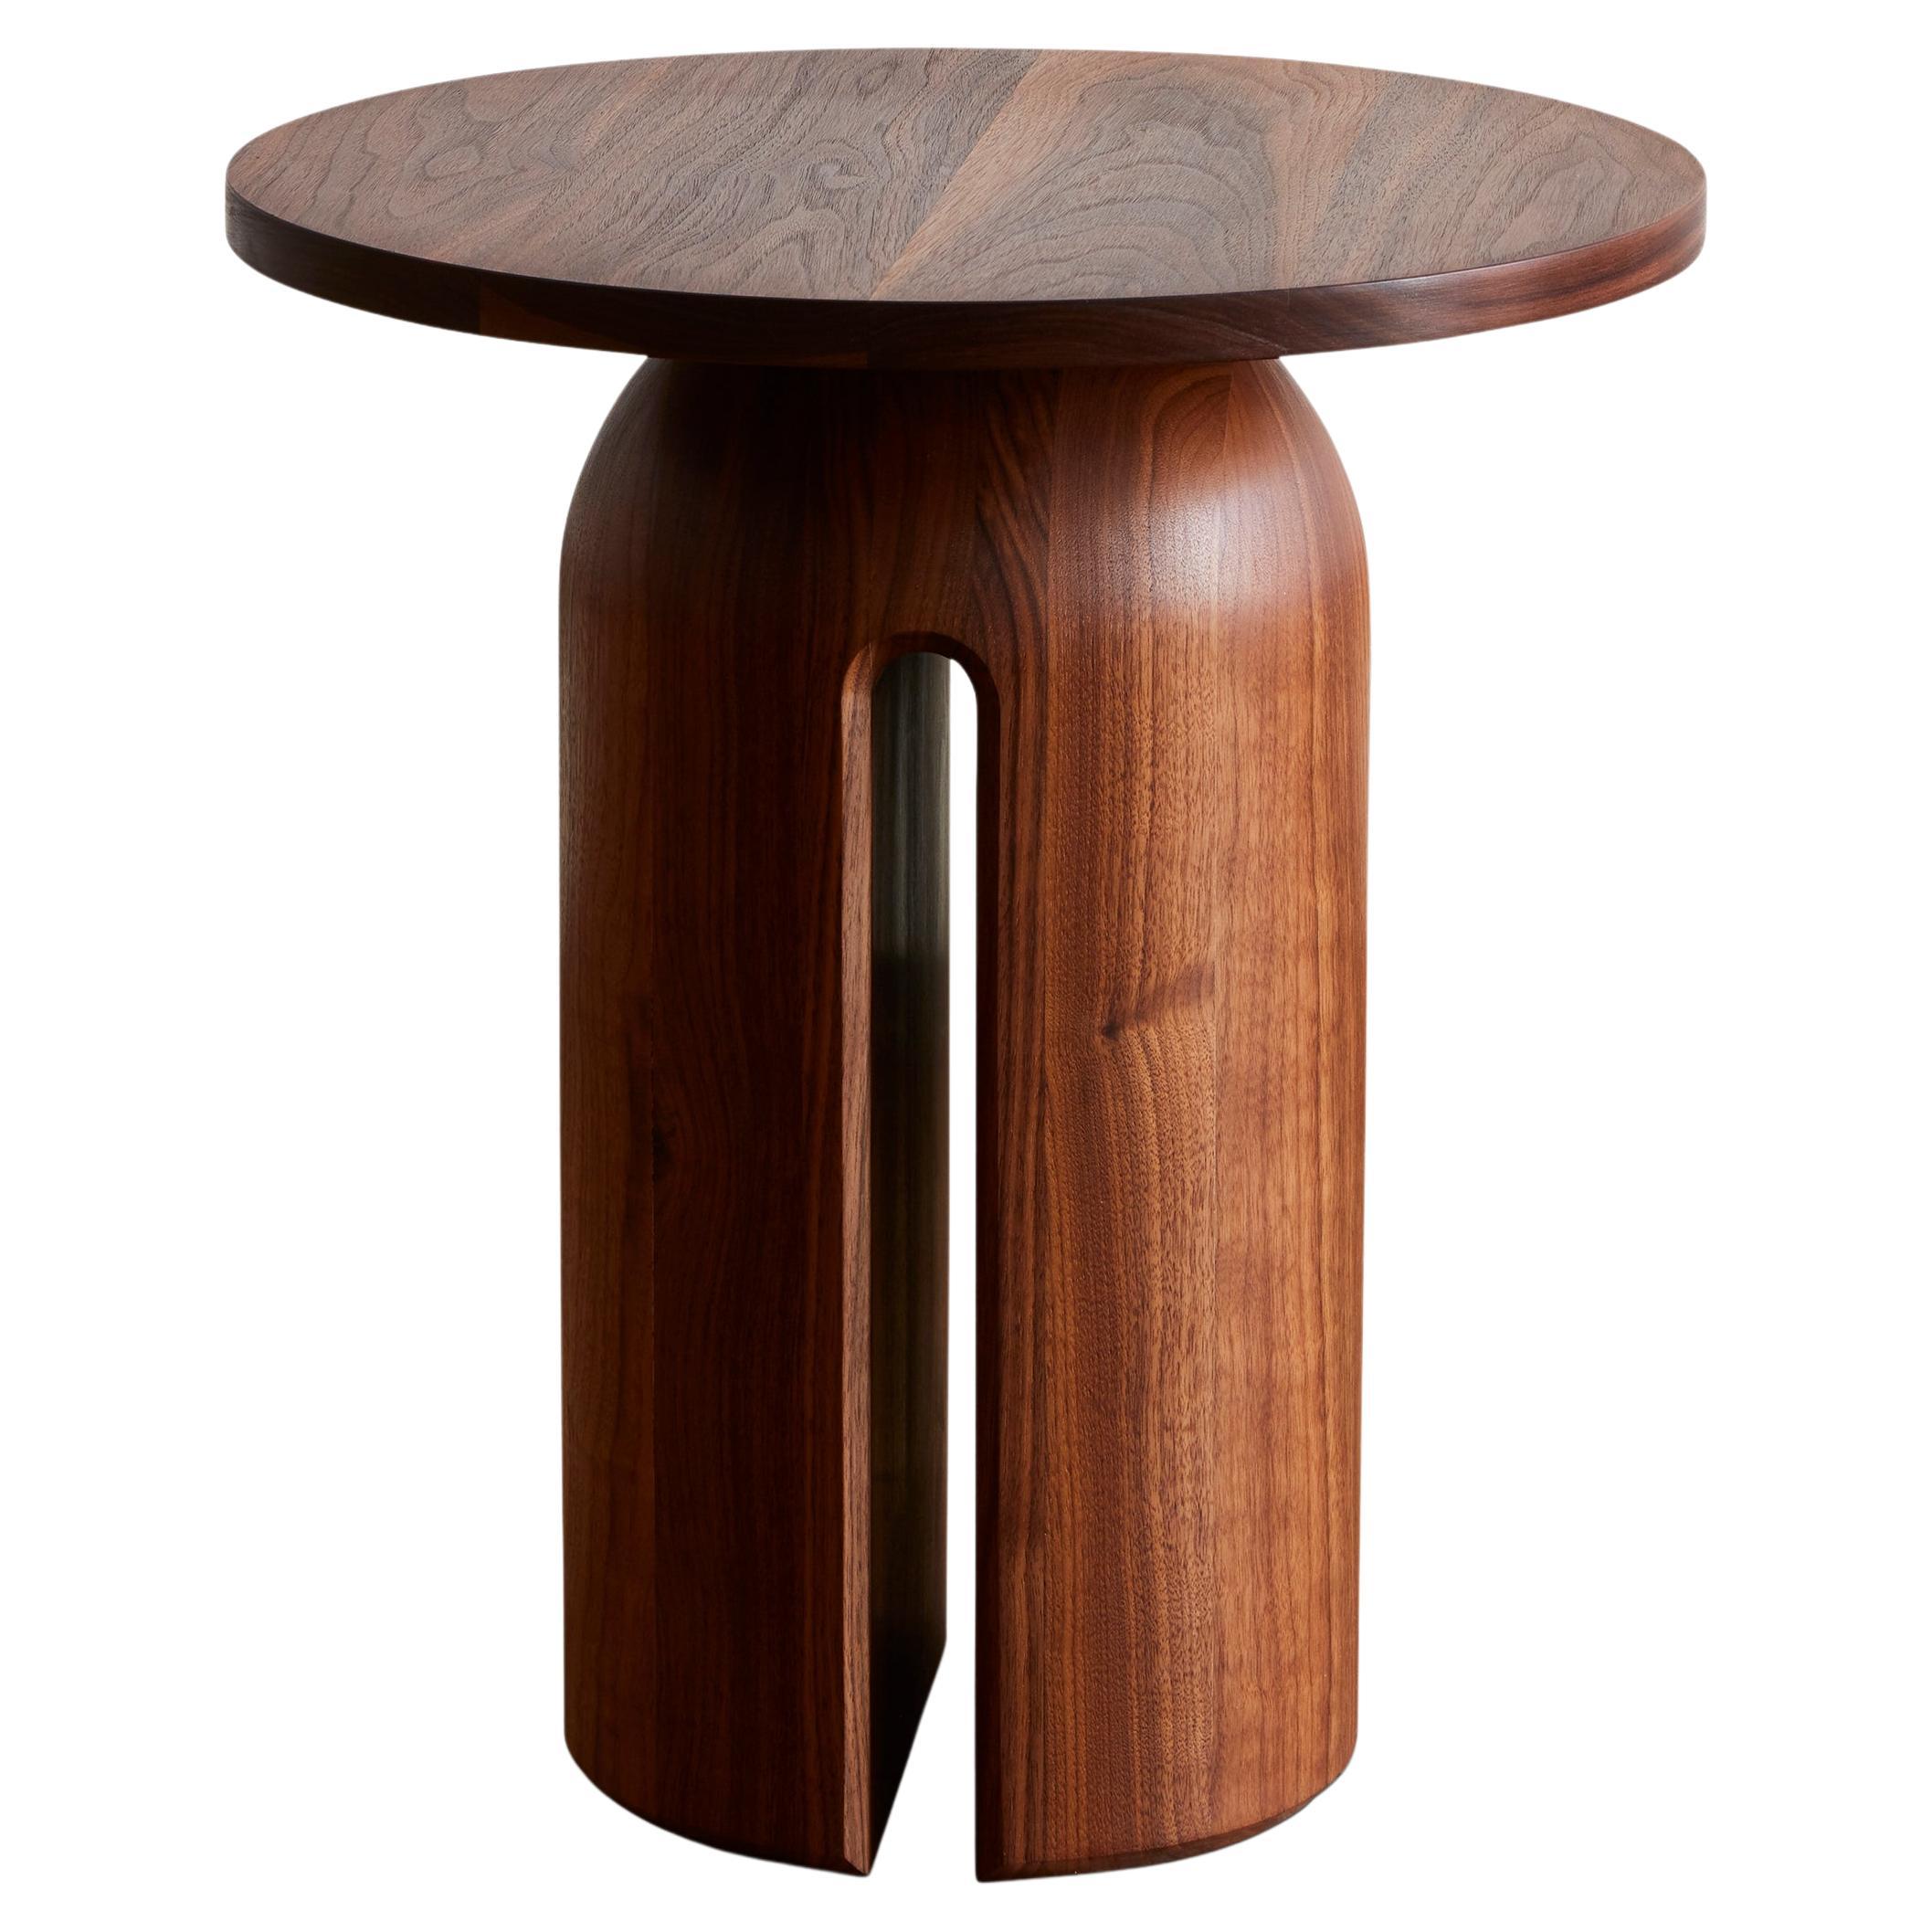 Contemporary Oco Side Table in Solid Wood by Luteca for indoor outdoor use